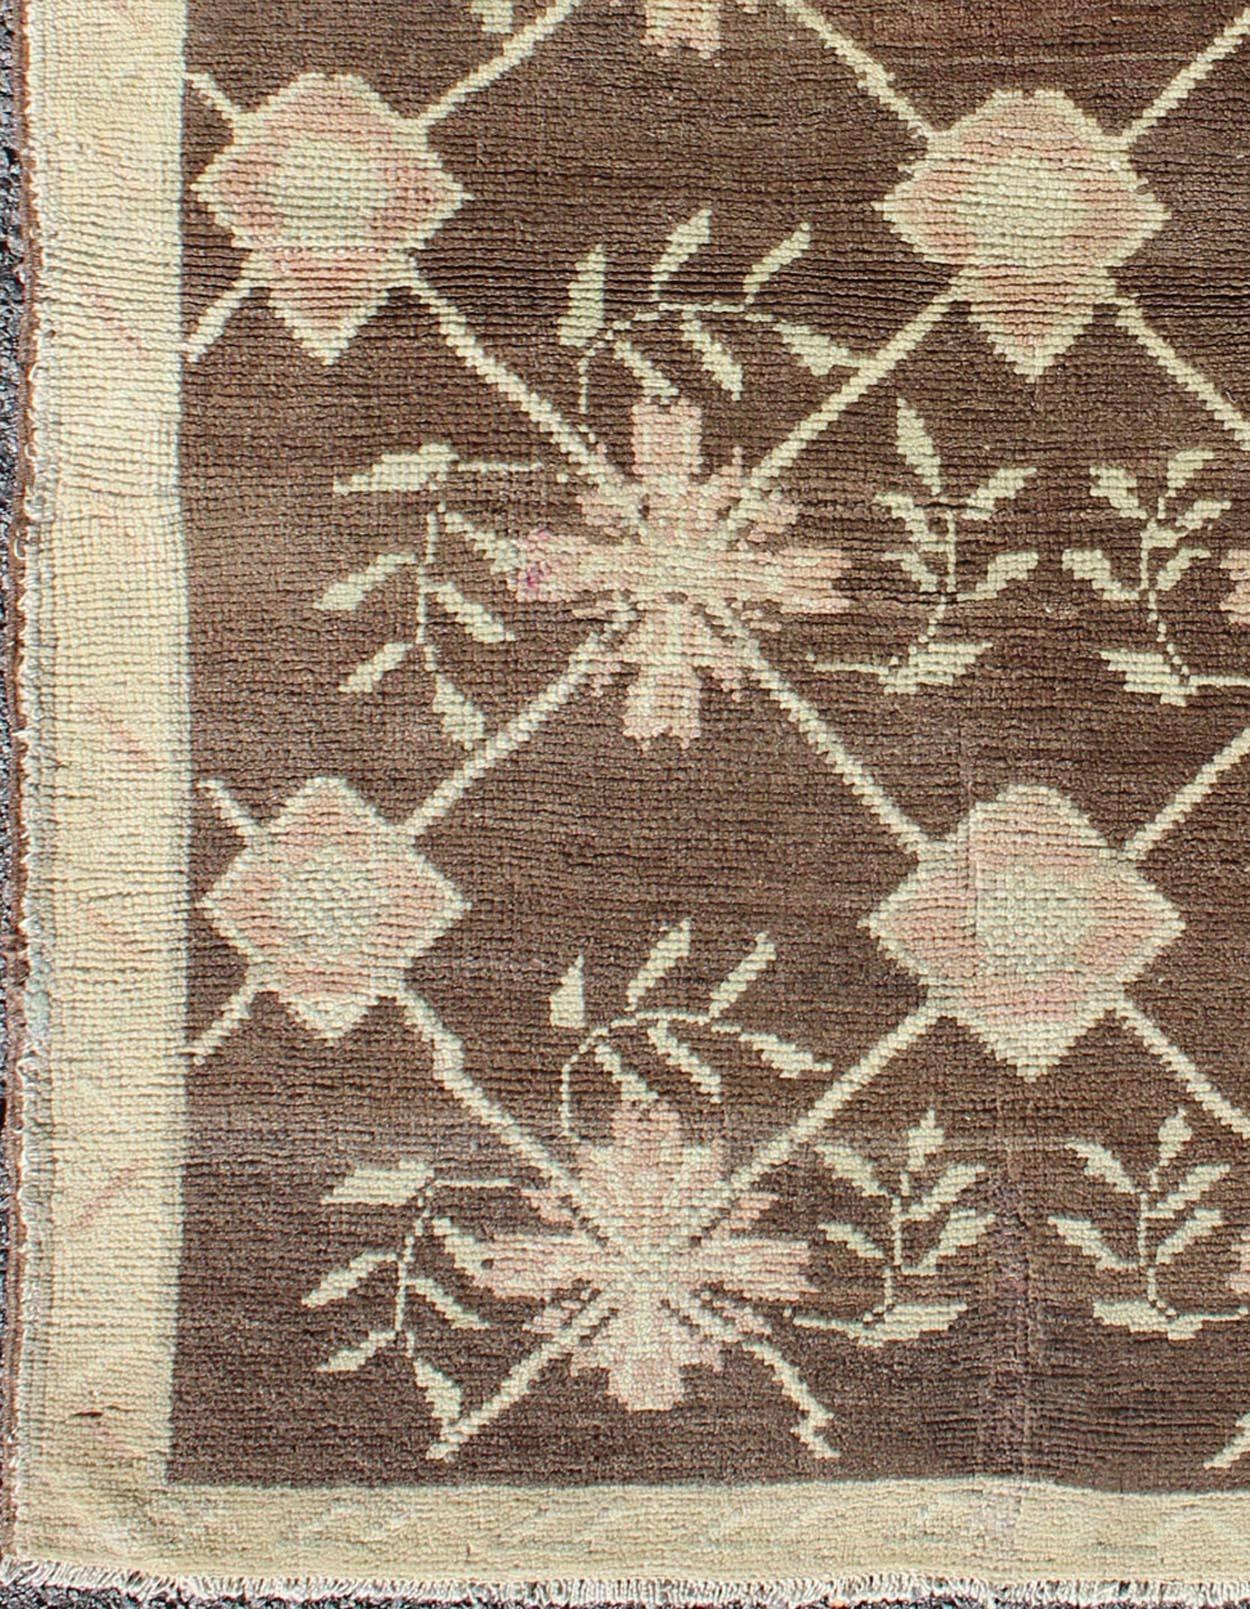 Vintage Turkish Oushak rug with Lattice design in brown, tan, pink, with a modern look rug en-115283, country of origin / type: Turkey / Oushak, circa 1940

Set on a dark mocha brown field with an all-over pattern, this beautiful mid-century Turkish